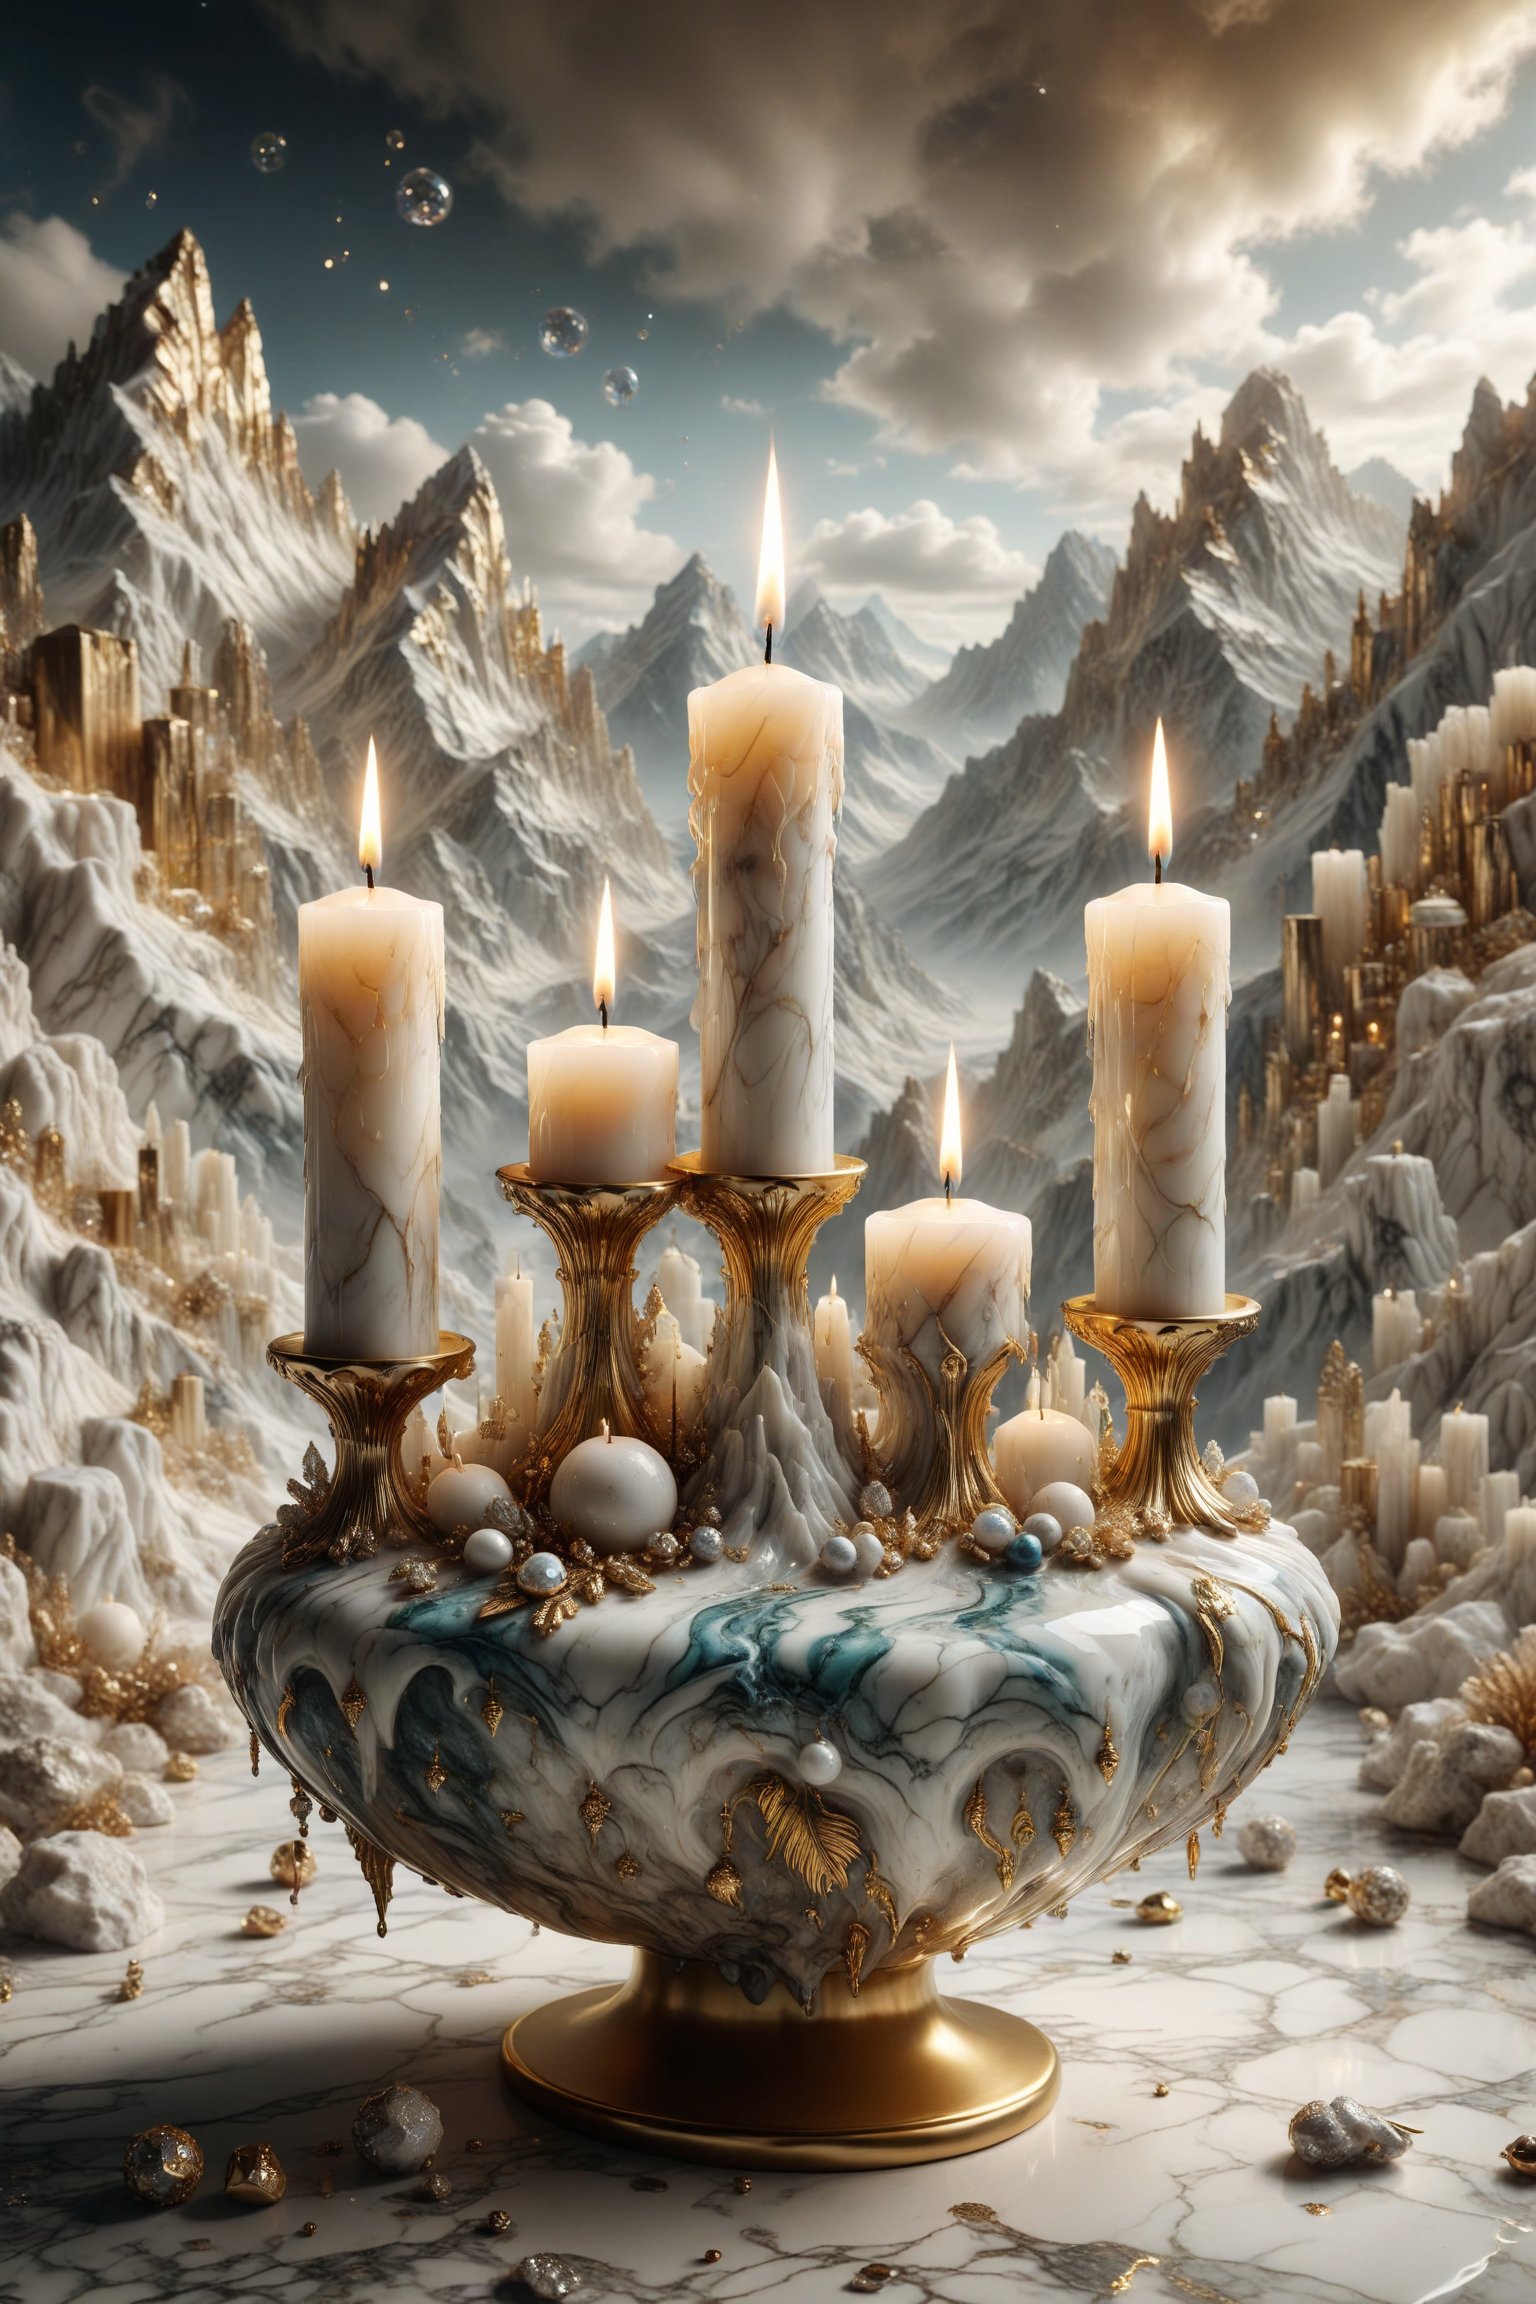 A luxury candle with marble texture and interesting, surreal organic curves, in a surreal mountainous landscape with candelabras carved in the shape of mountain peaks. Inlaid mountains, decorative gold accents, feathers, diamonds, and iridescent bubbles.